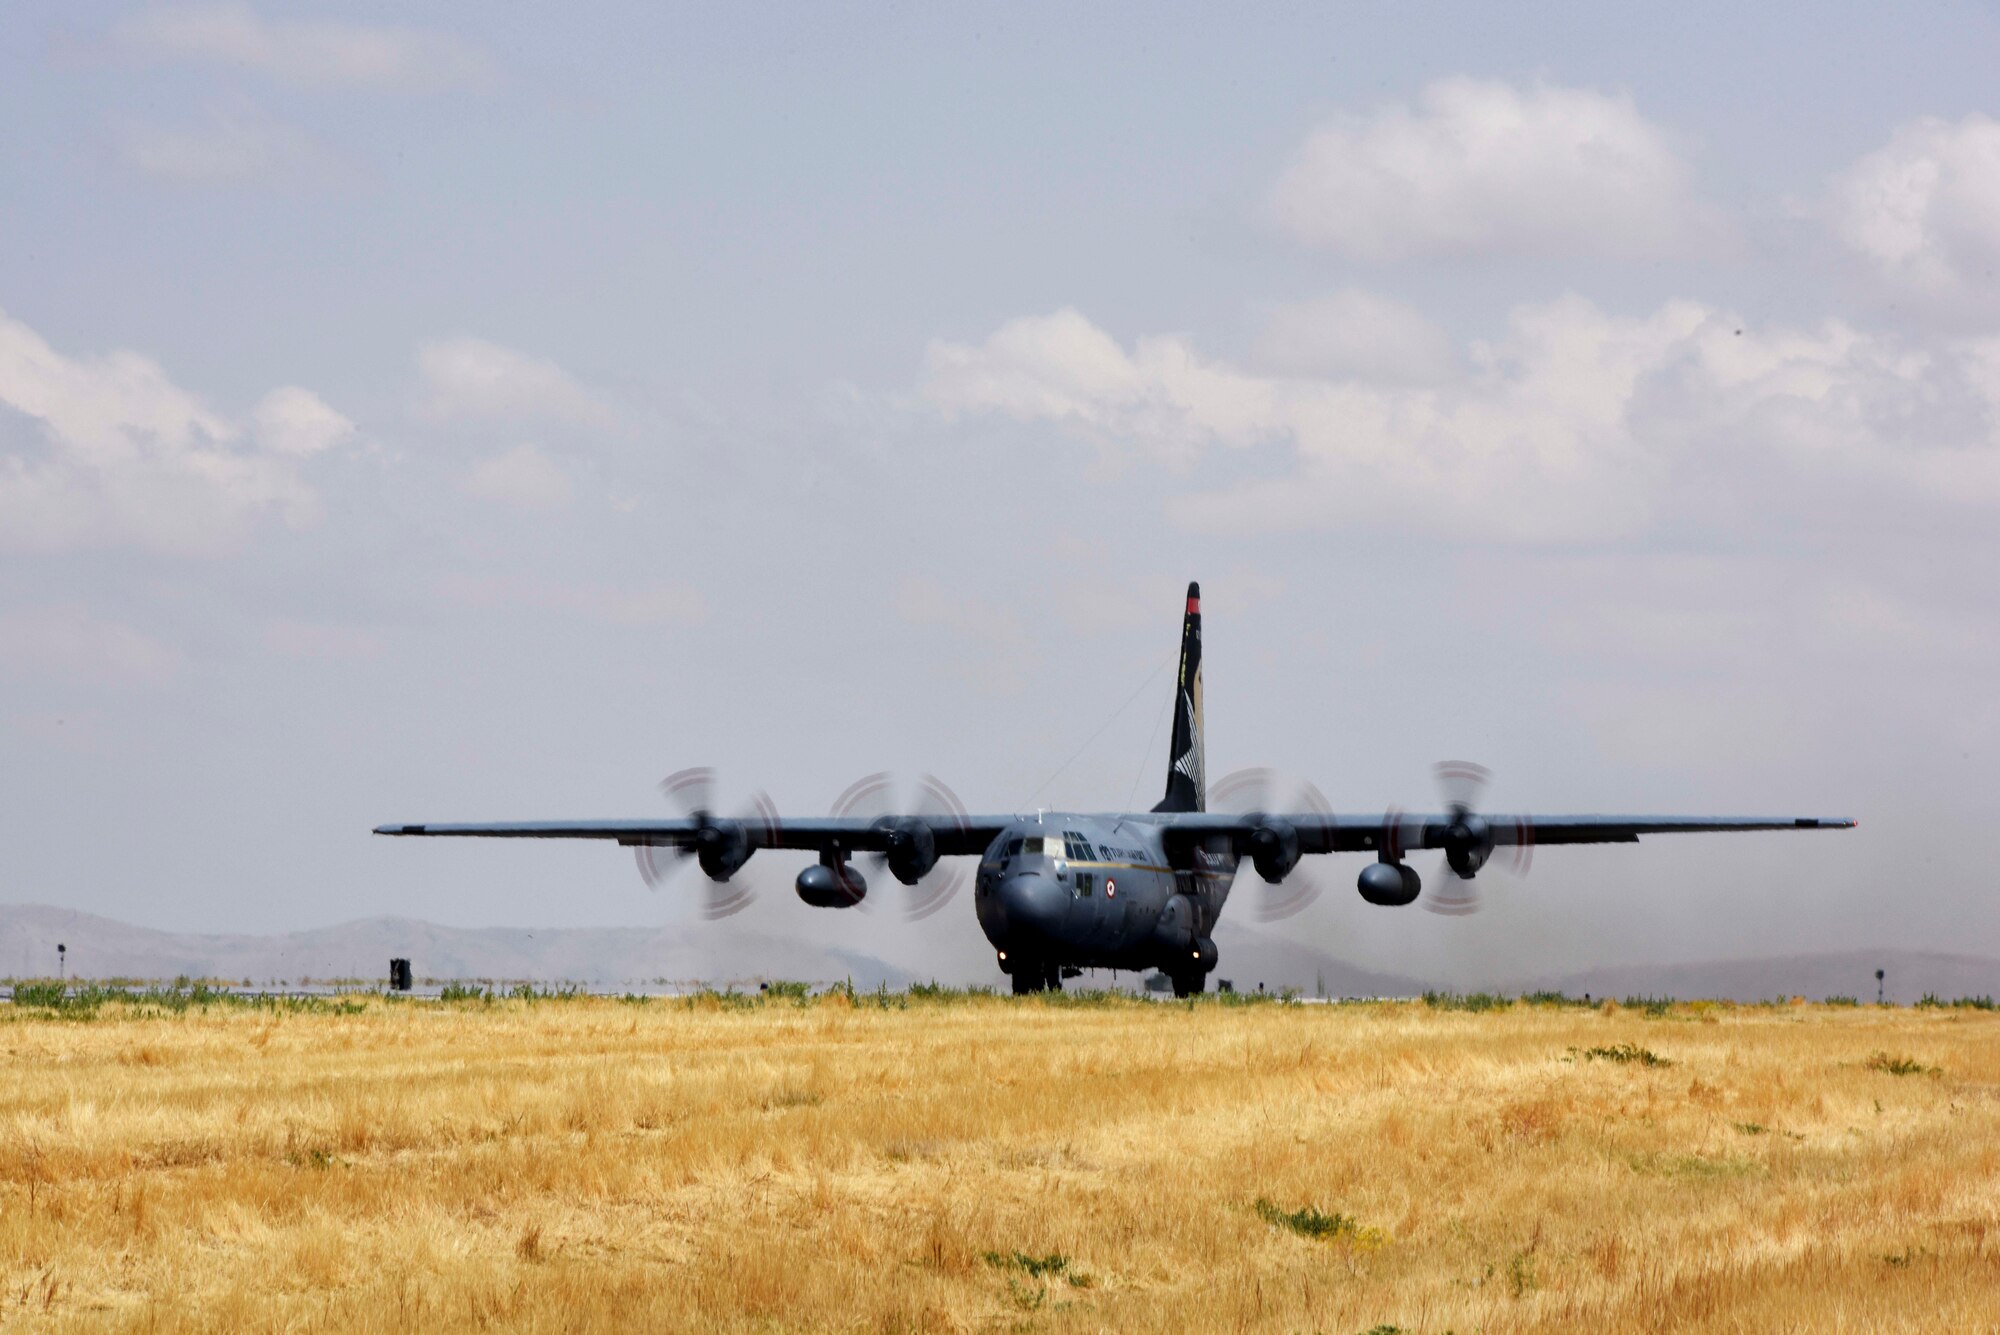 A Turkish C-130 Hercules transport aircraft lands during Exercise Anatolian Eagle June 17, 2019, at the Third Main Jet Base, Konya, Turkey. The exercise involved a variety of aircraft from the U.S., Turkey, Qatar, Jordan, Pakistan, Italy, and NATO. Azerbaijan also joined the exercise as an observer nation. (U.S. Air Force photo by Senior Airman Joshua Magbanua)